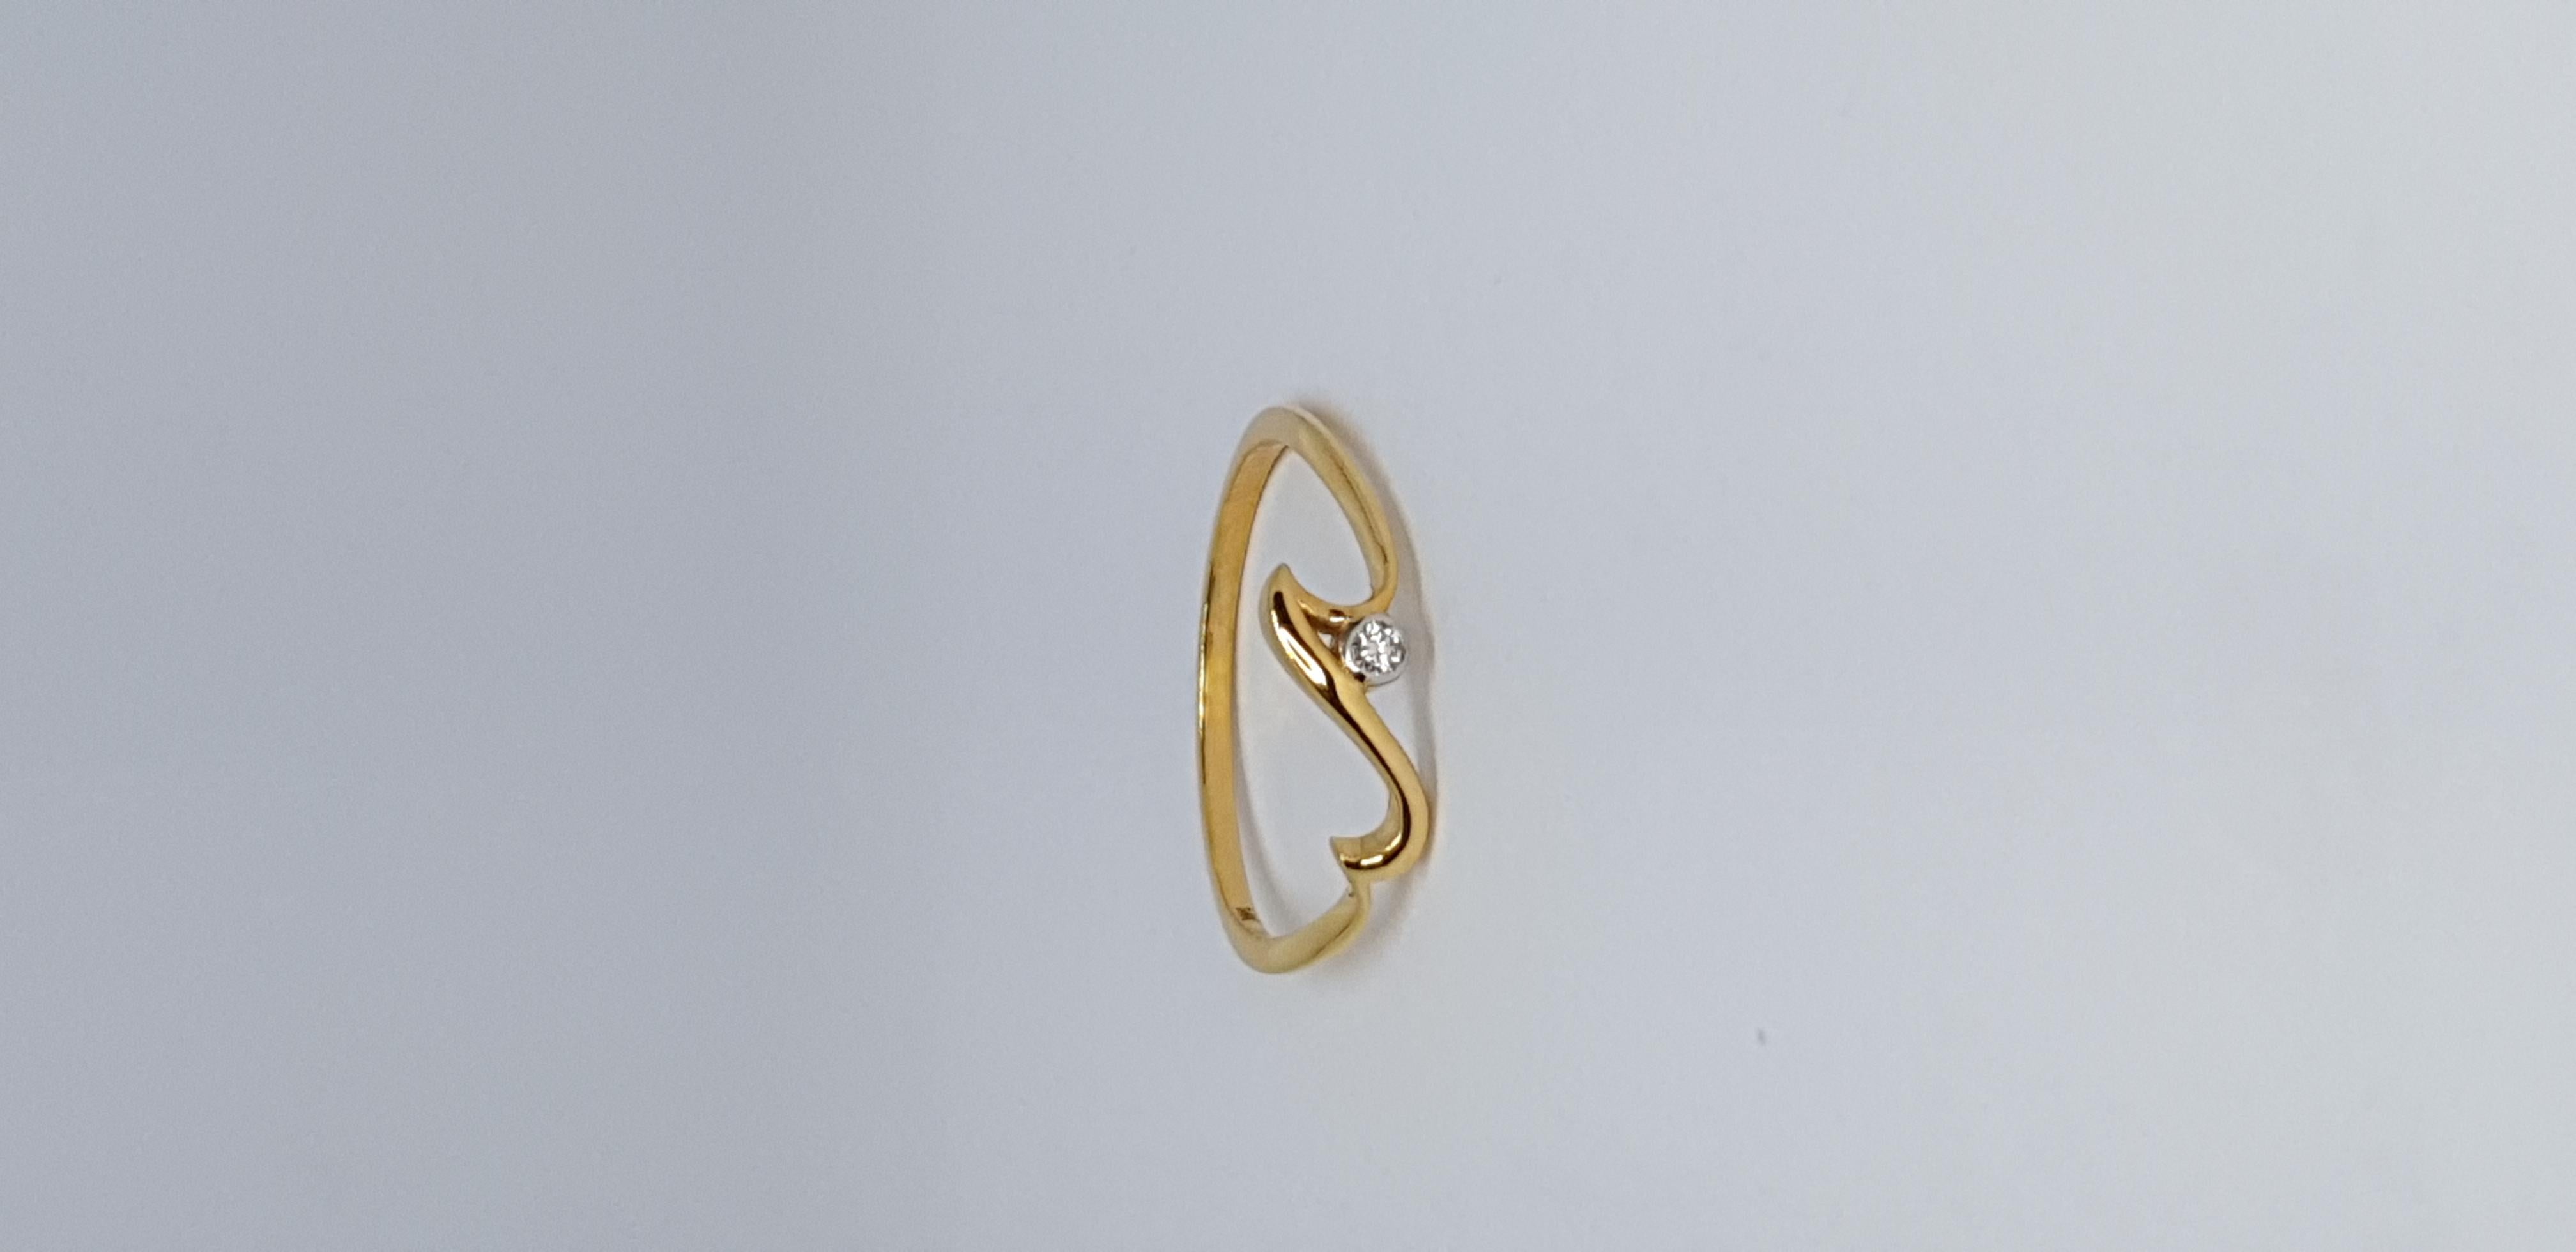 For Sale:  Natural Diamond Wave Ring 14K Solid Gold Dainty Ocean Lover Jewelry Gift. 11